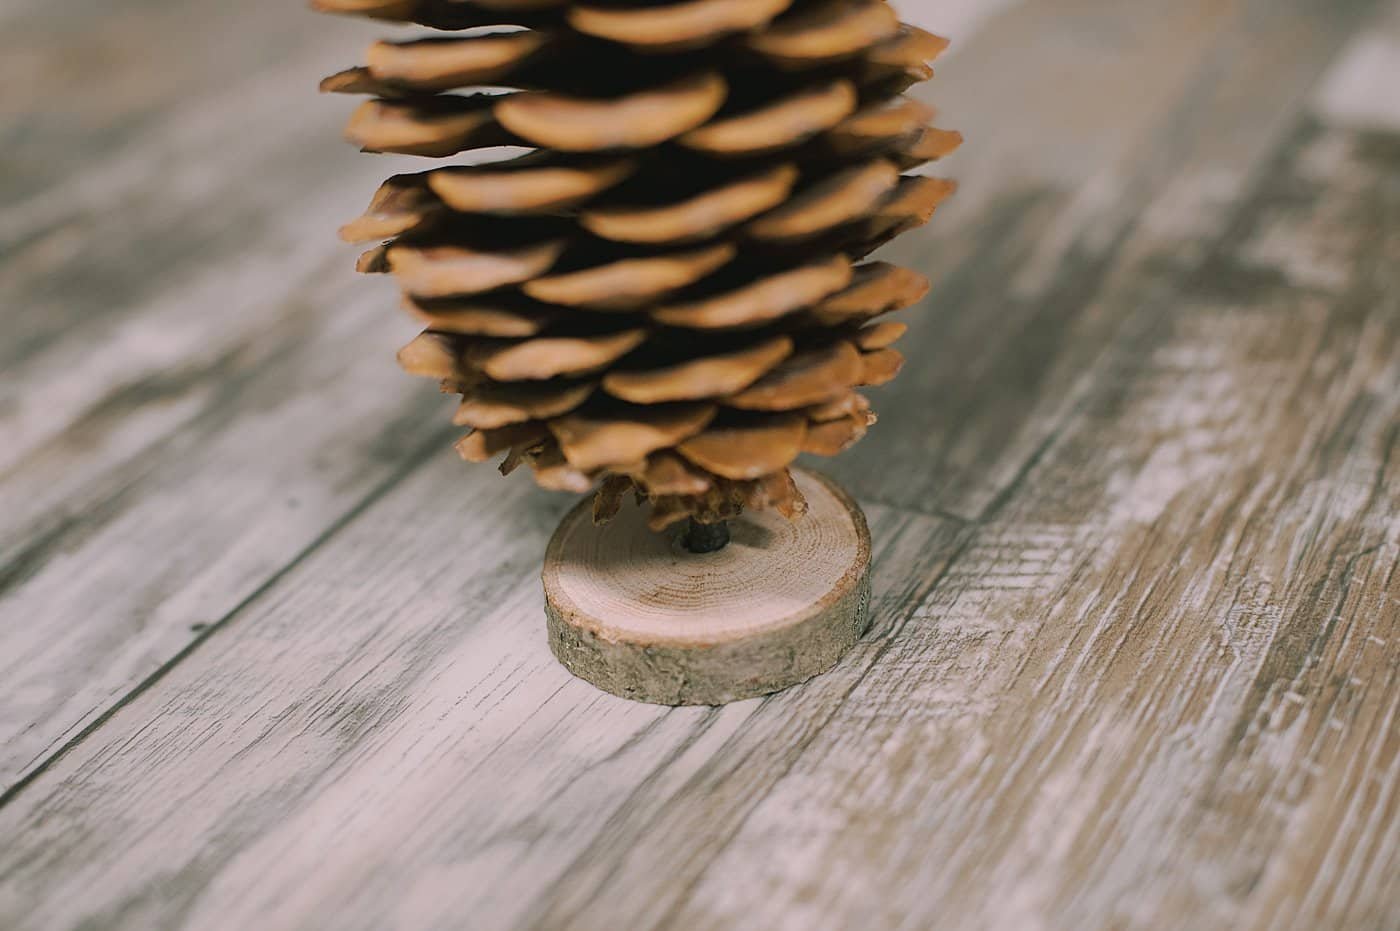 Hot glue pine cone onto the wooden base.